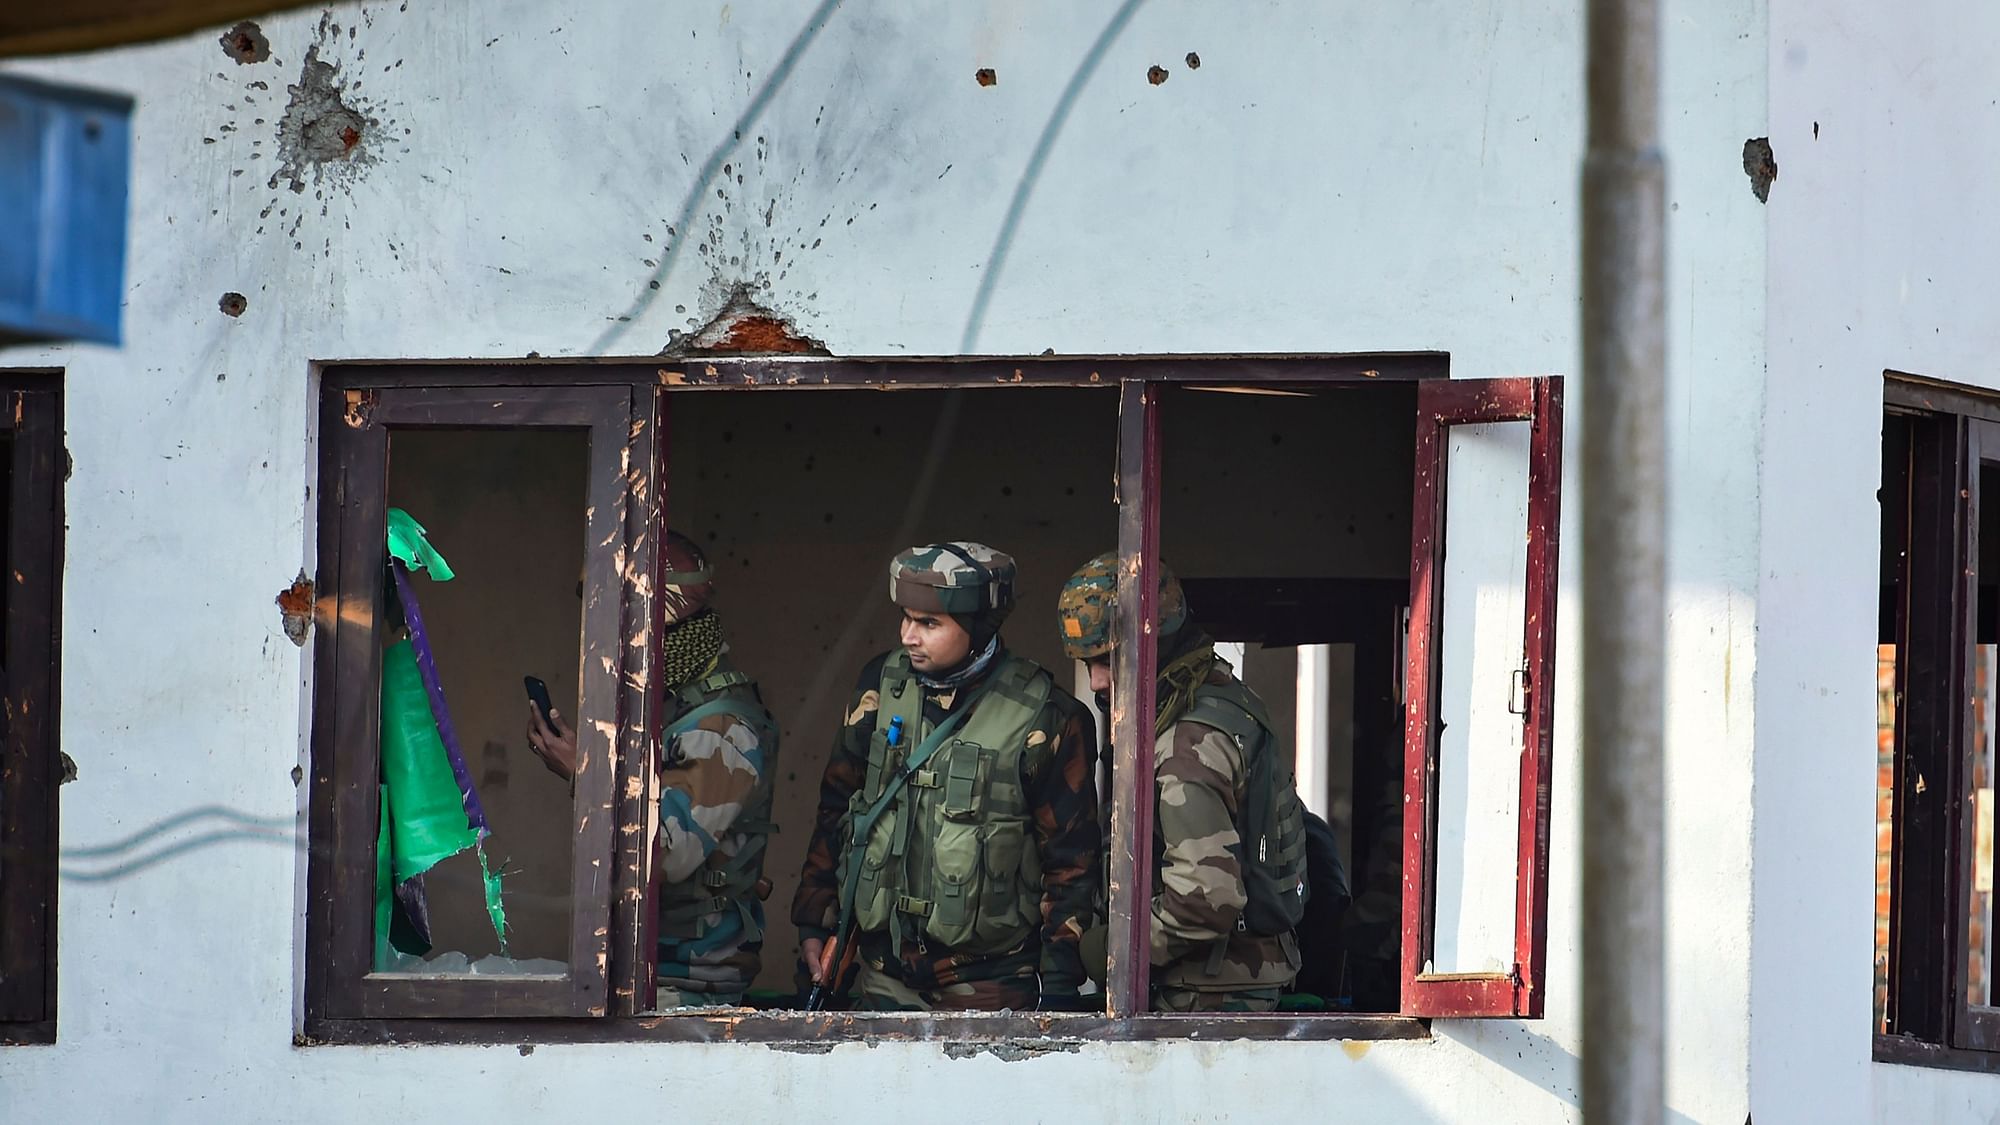 Army personnel conduct searches in the house where militants were hiding, after an encounter with them, at Lawaypora on the outskirts of Srinagar, on Wednesday, 30 December 2020. Three militants were killed in the encounter.